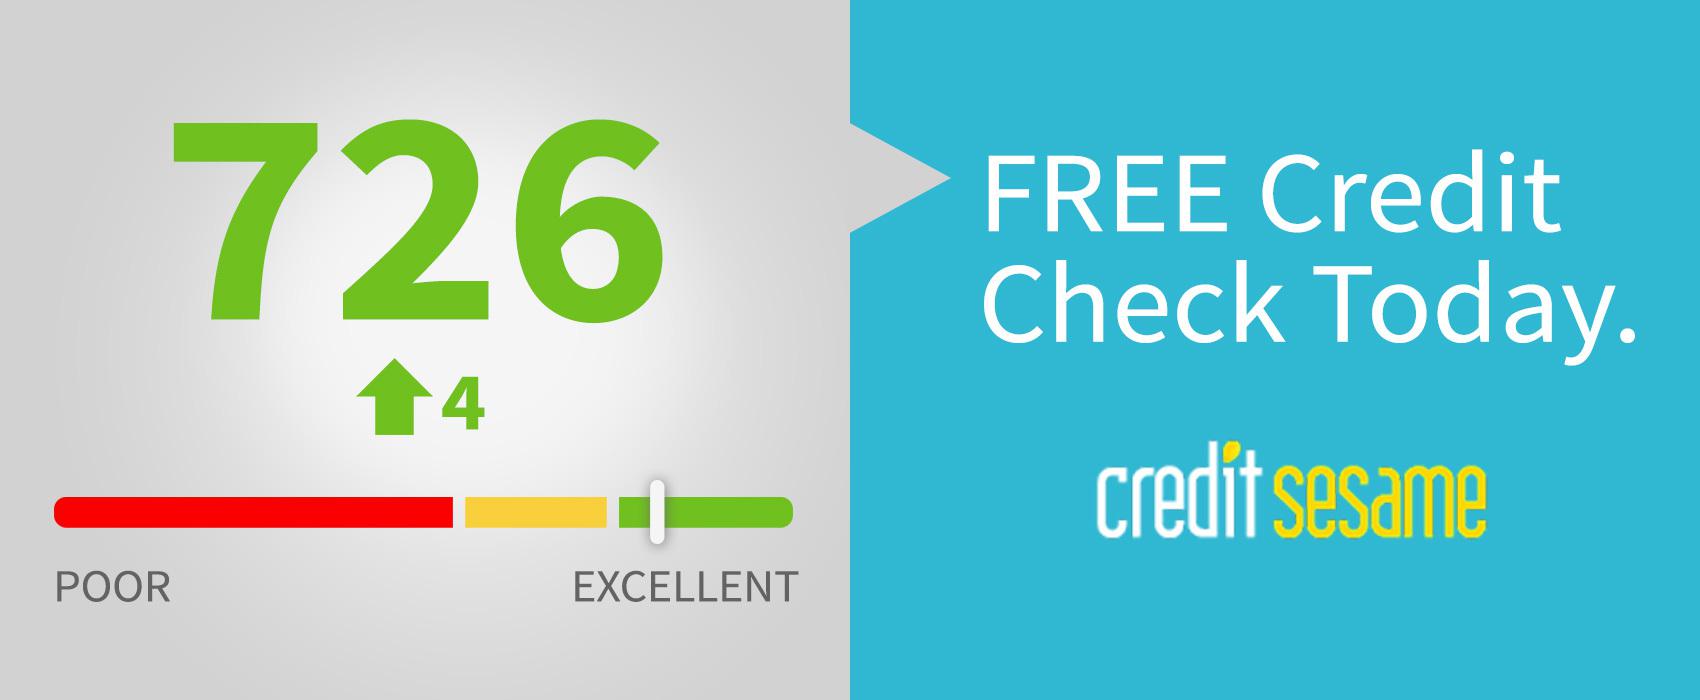 Find Out Your Credit Score For Free!